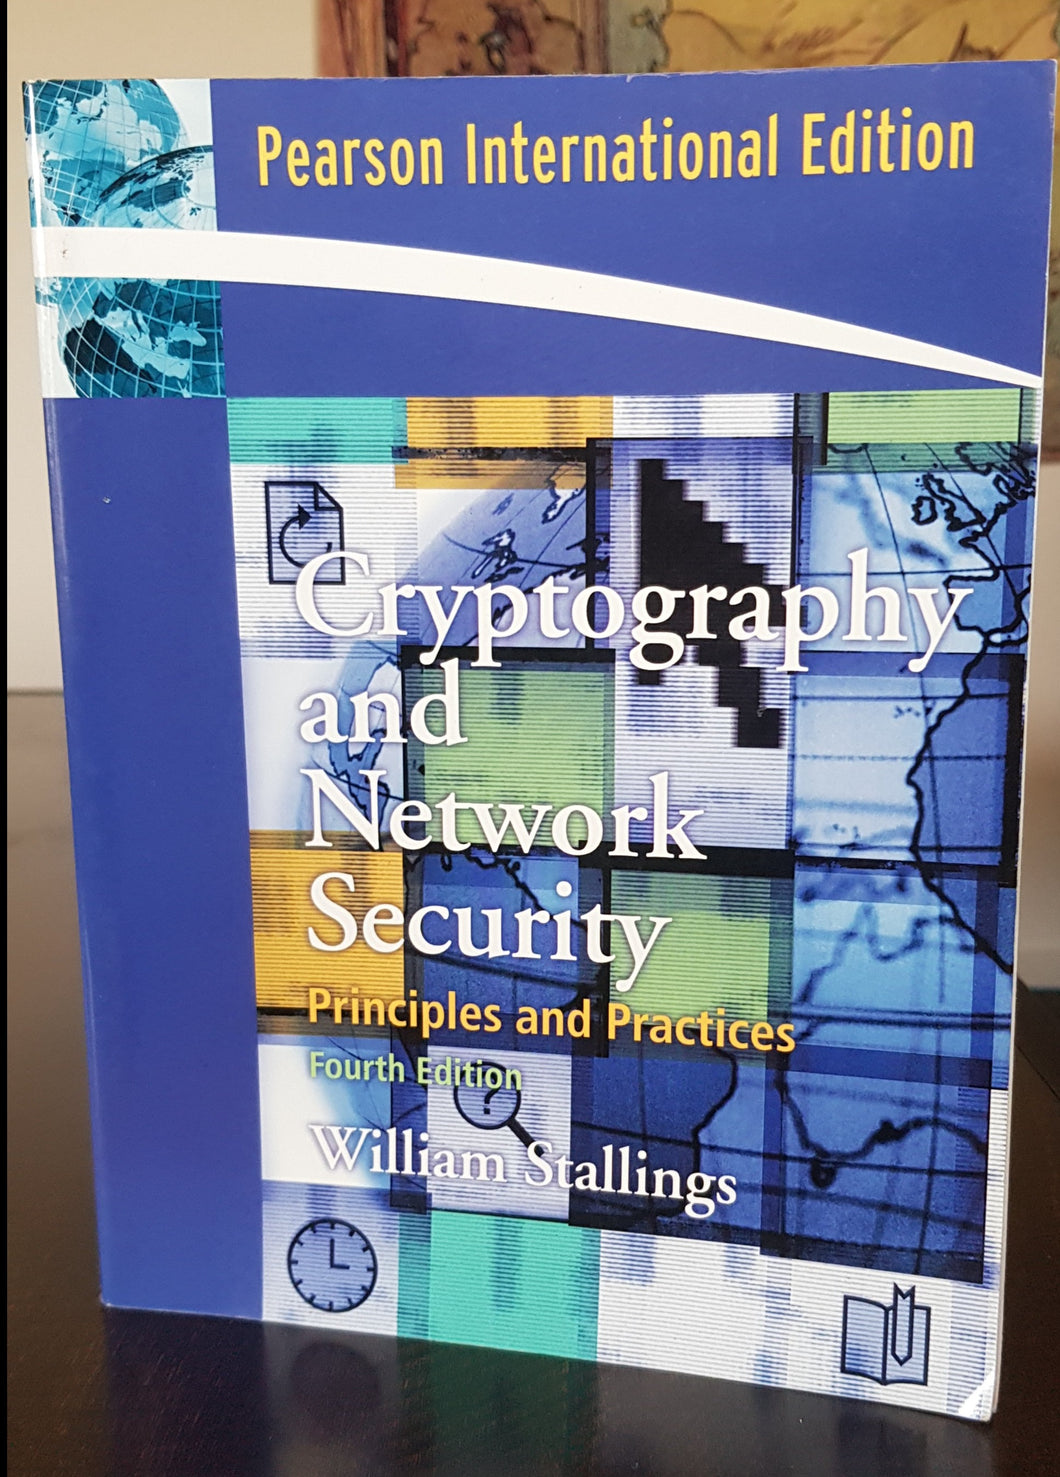 Cryptography and Network Security: Principles and Practices by William Stallings (4th Edition)